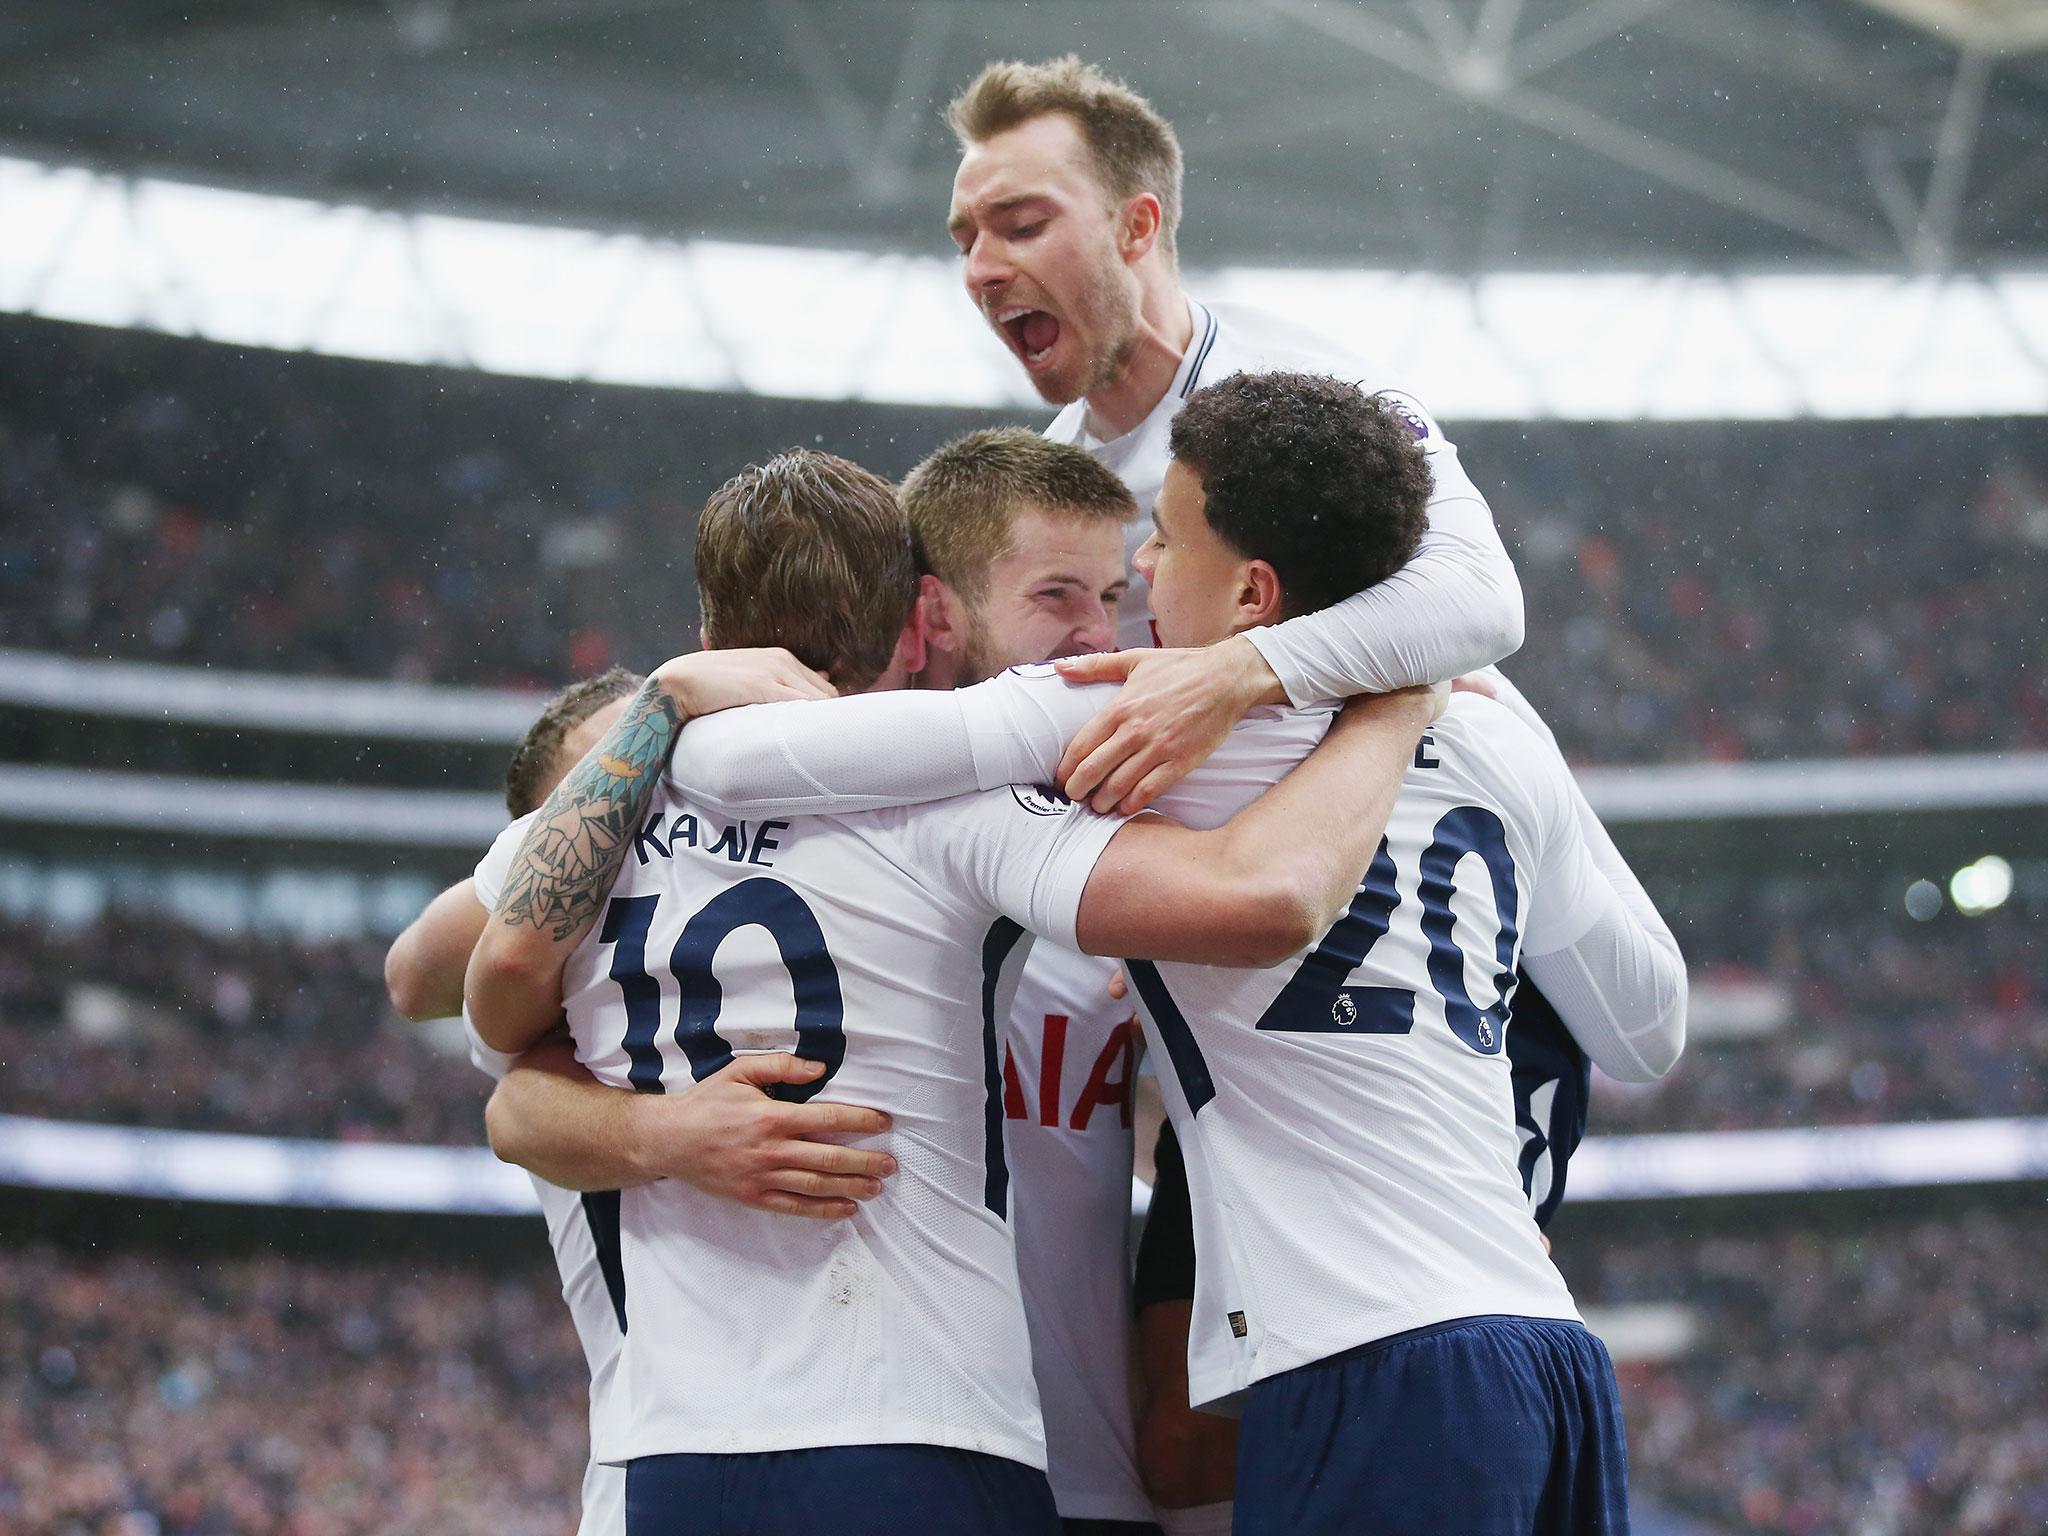 Tottenham now show no fear or hesitation when playing at Wembley